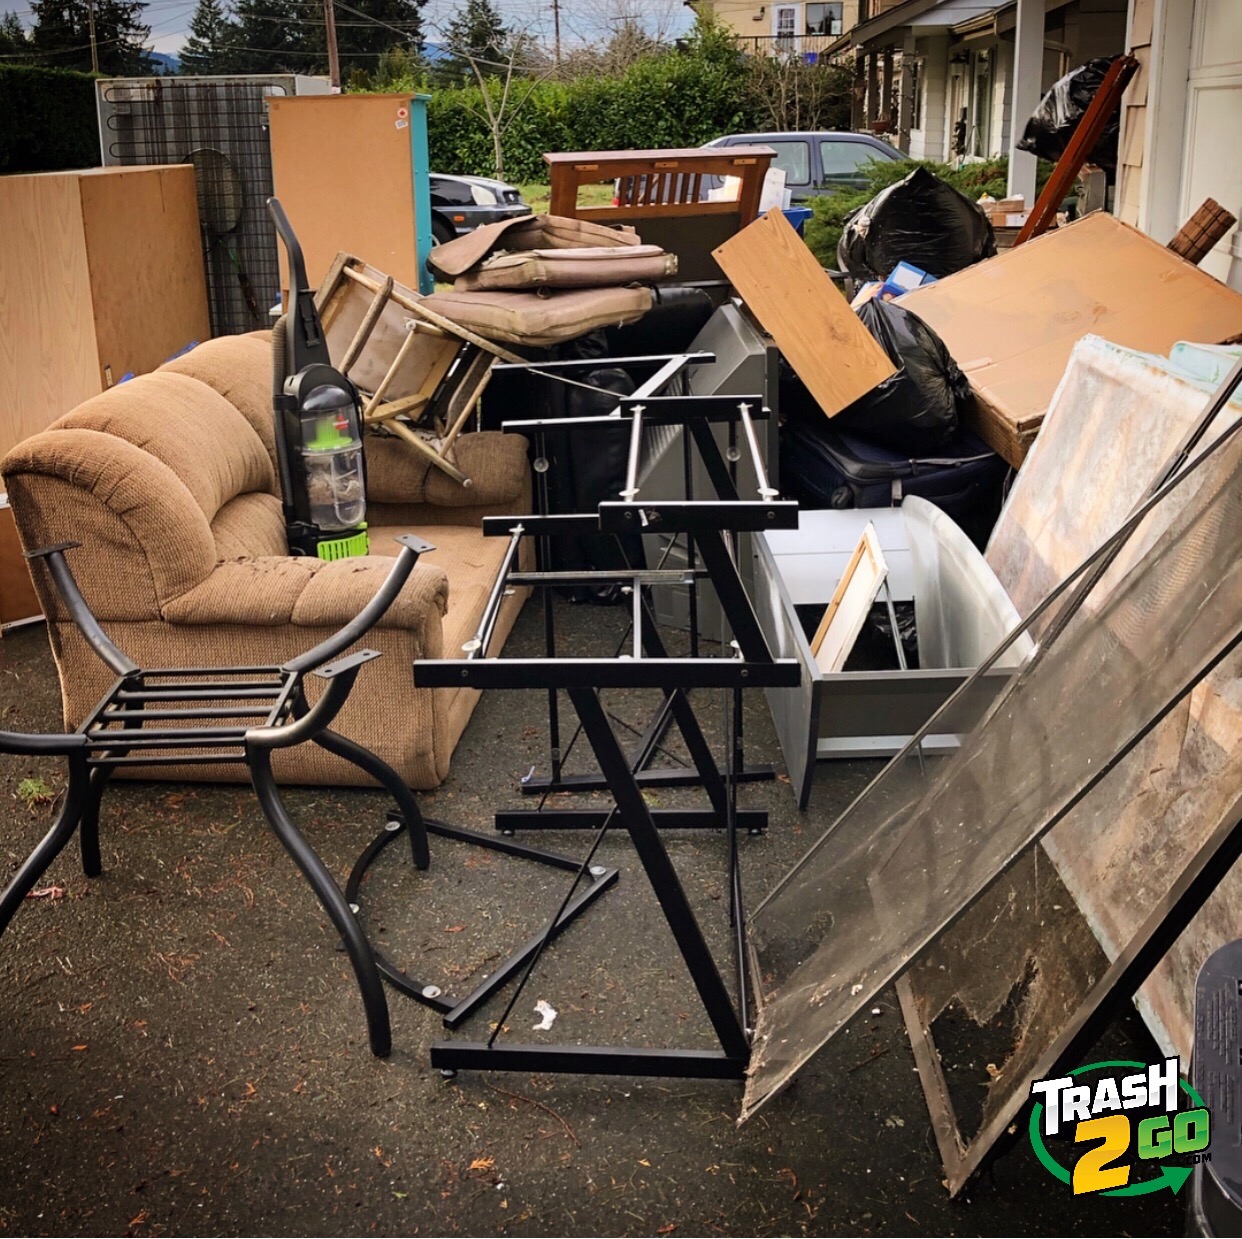 Nanaimo Junk Removal furniture donation and recycling Trash2Go